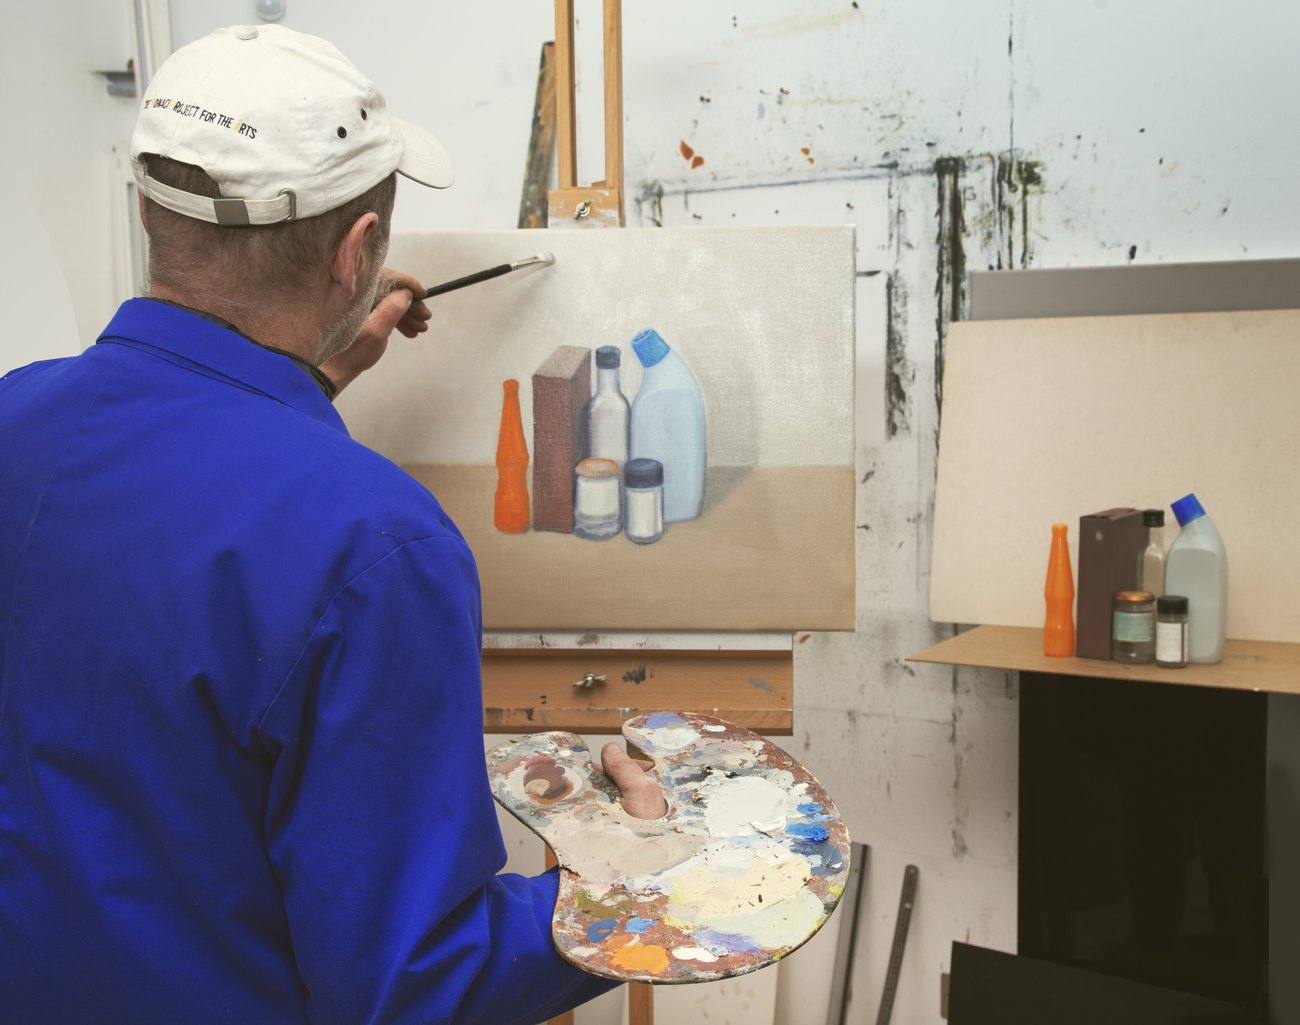 The photo shows Gavin Turk painting a still life 